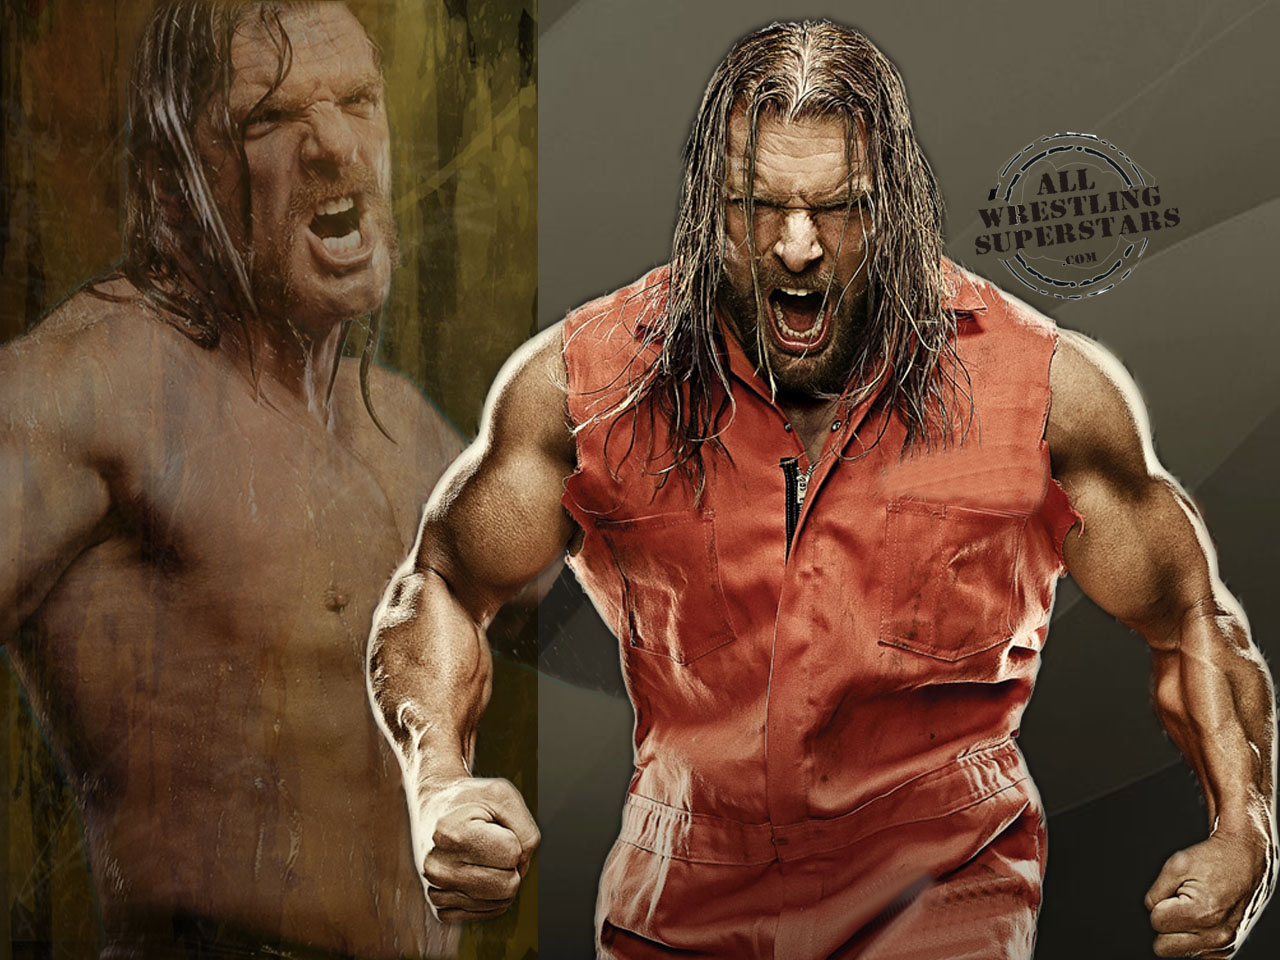 Angry Triple H In A Pose With His Strong Biceps Click On Image To